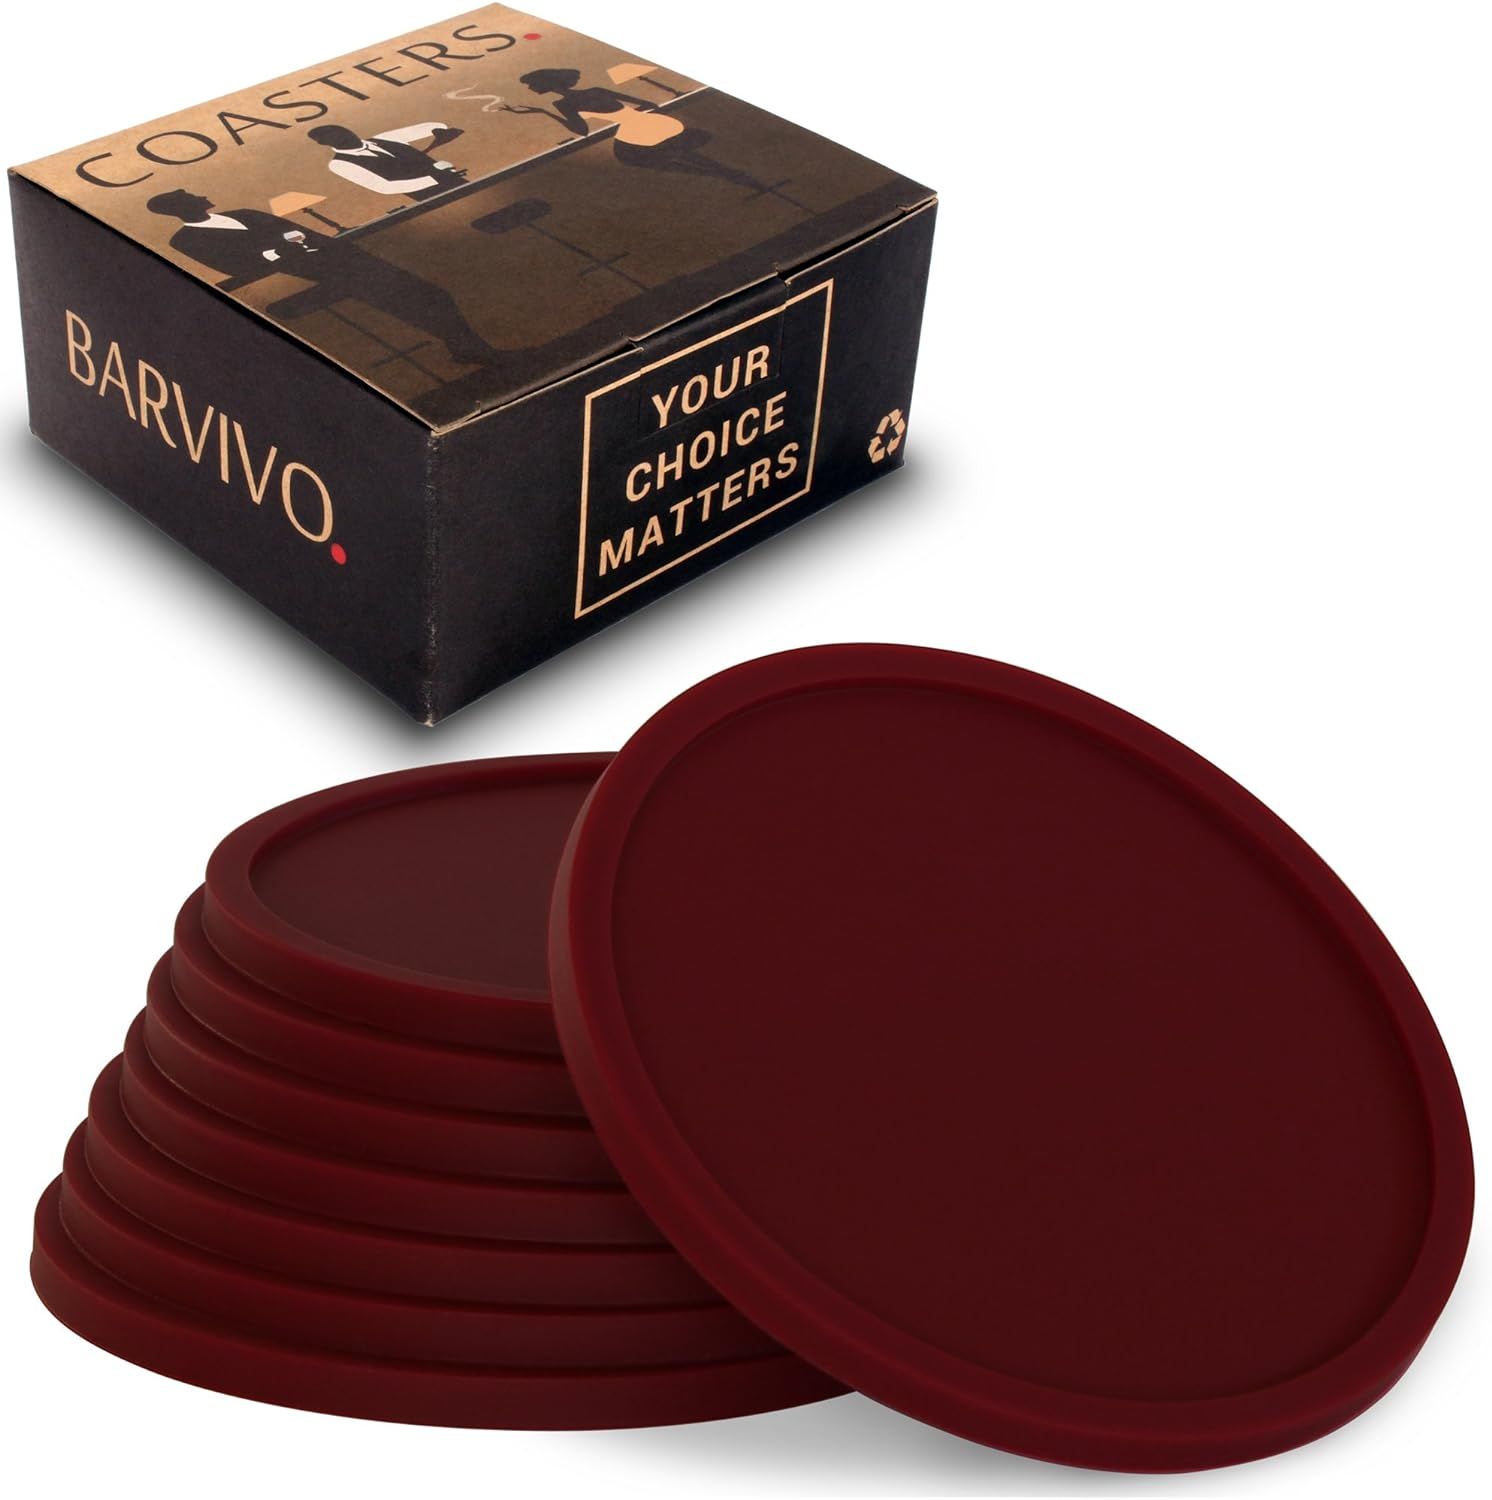 Drink Coasters by Barvivo Set of 8 - Tabletop Protection for Any Table Type, Wood, Granite, Glass... | Amazon (US)